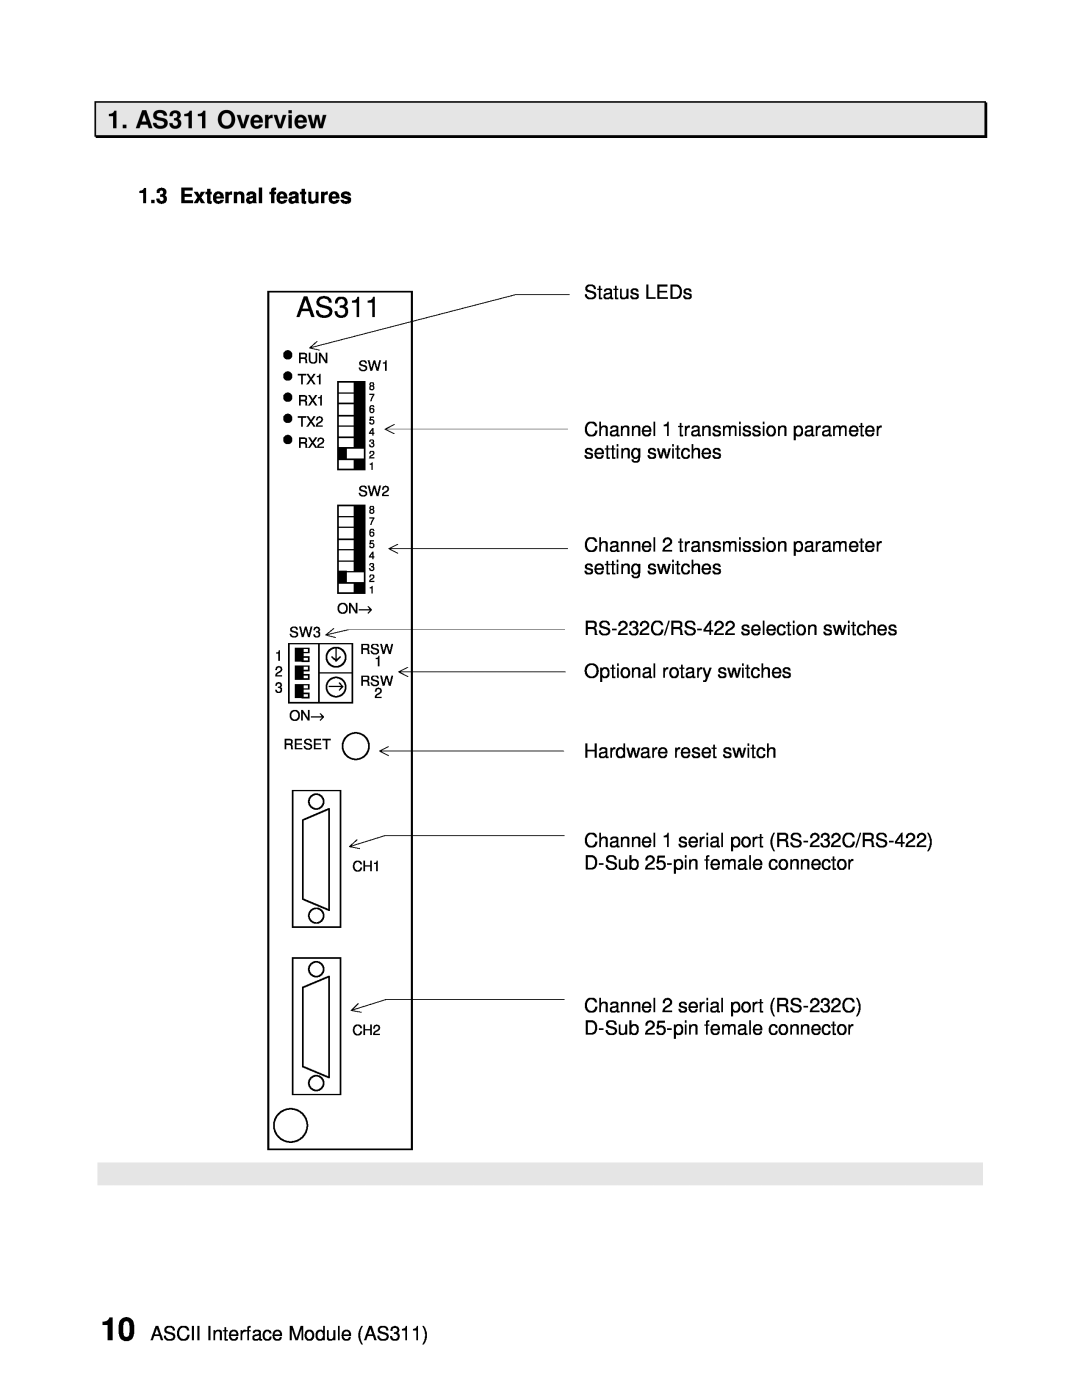 Toshiba user manual External features, 1. AS311 Overview 